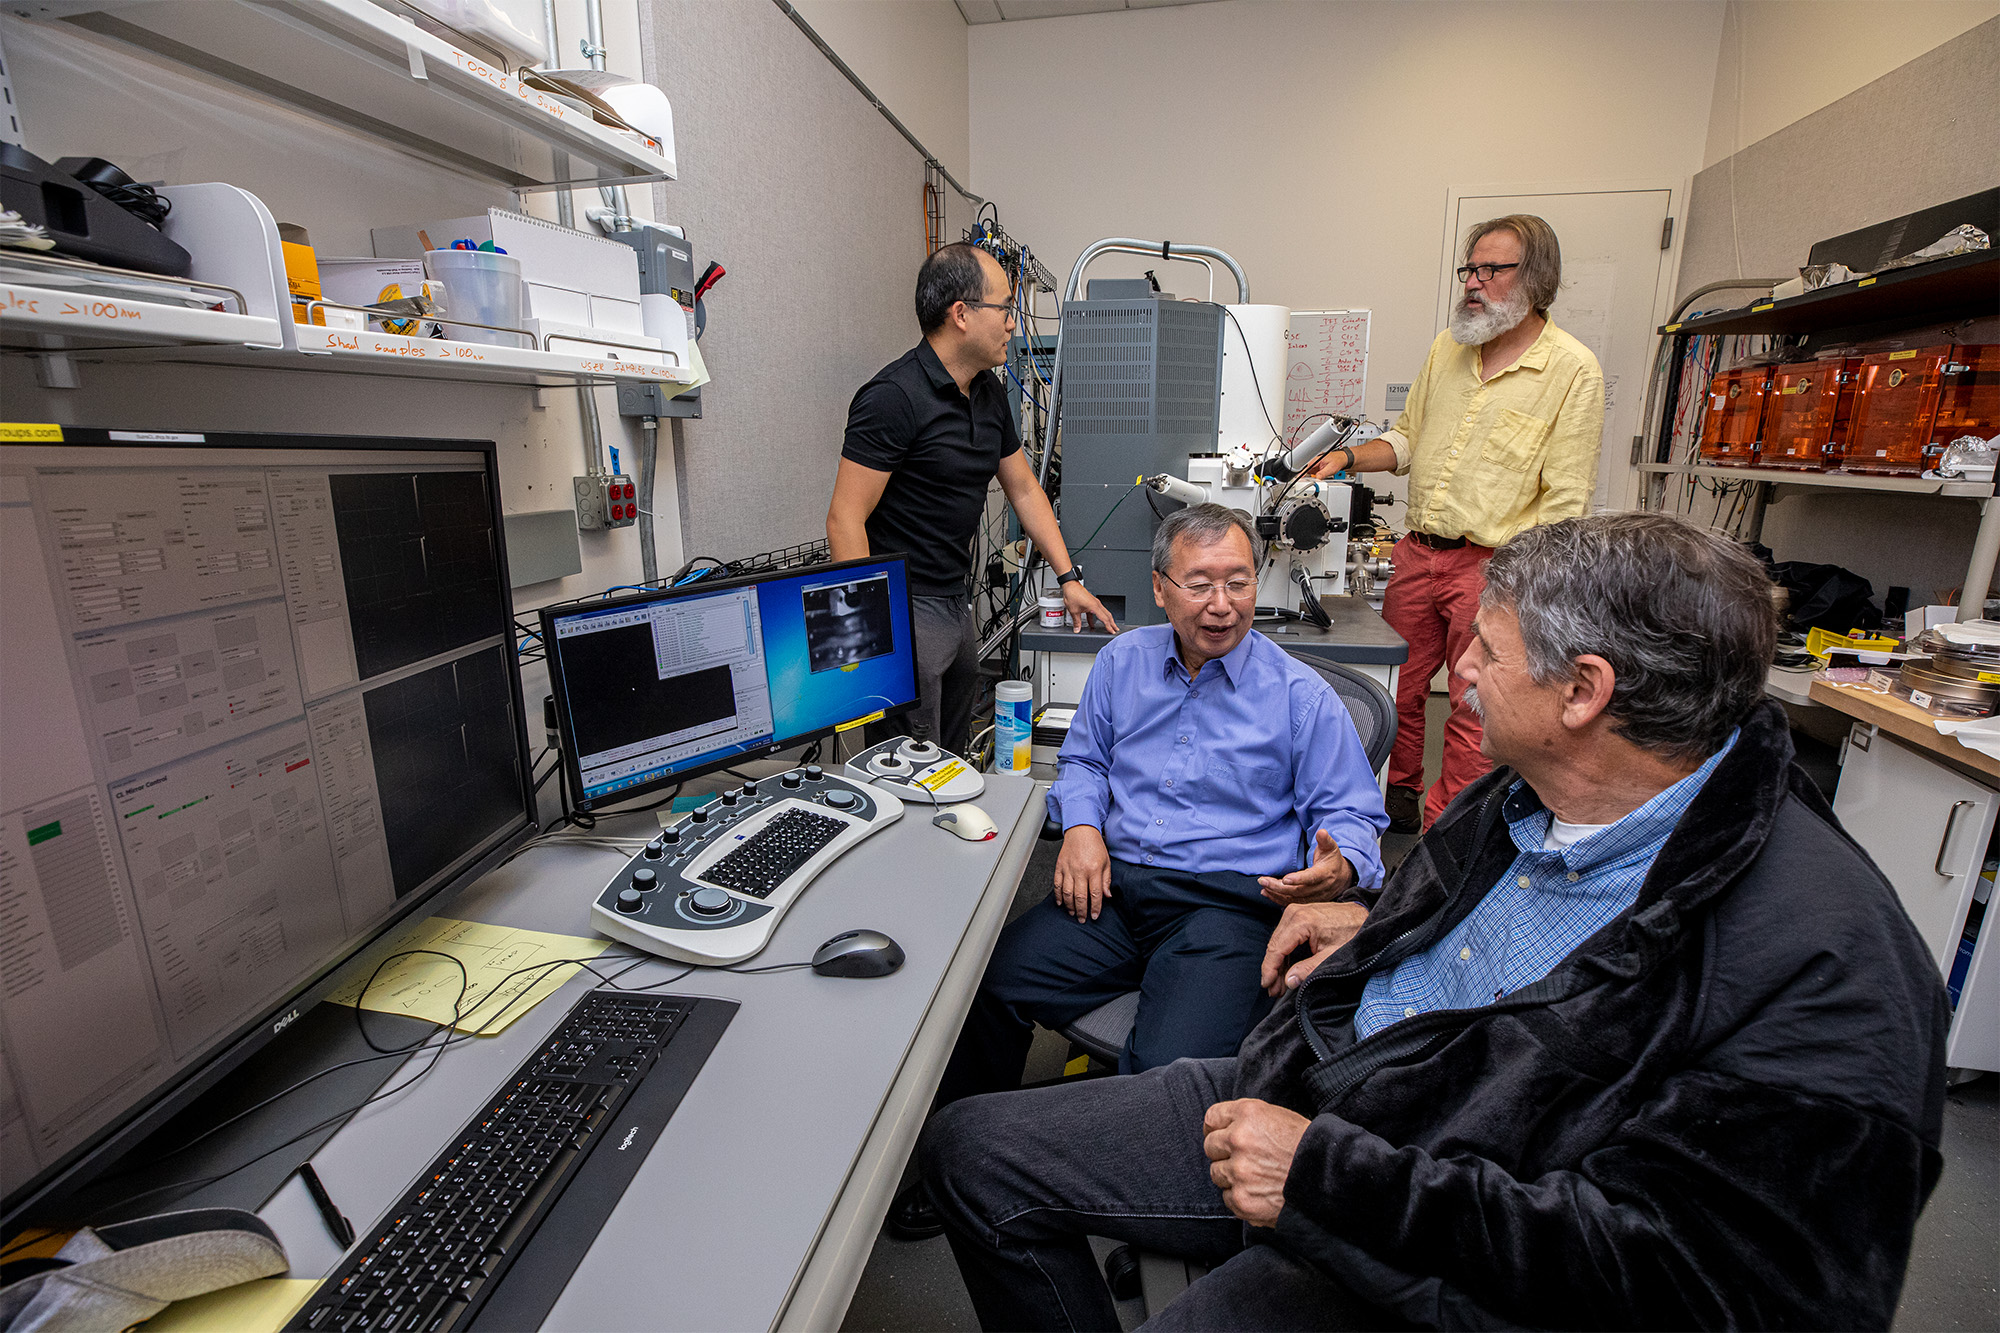 Four scientists converse with each other in a lab.